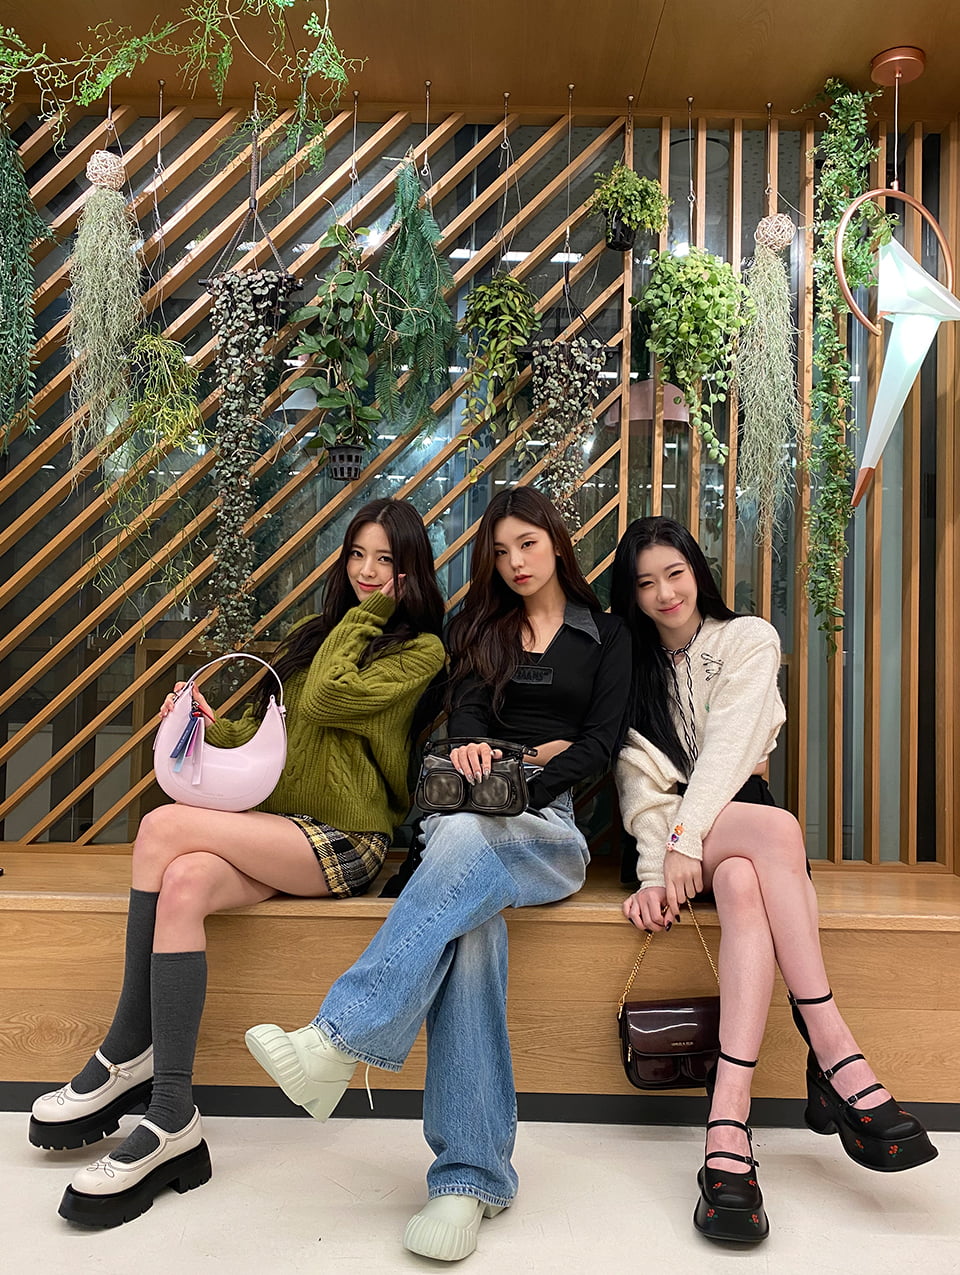 Women’s Daki Belted Fur-Trim Curved Bag in multi and Lucile Satin Platform Sandals in red, as seen on Lia; Letitia Chain-Link Shoulder Bag in light blue and Harrianna Thigh-High Boots in black, as seen on Ryujin - CHARLES & KEITH